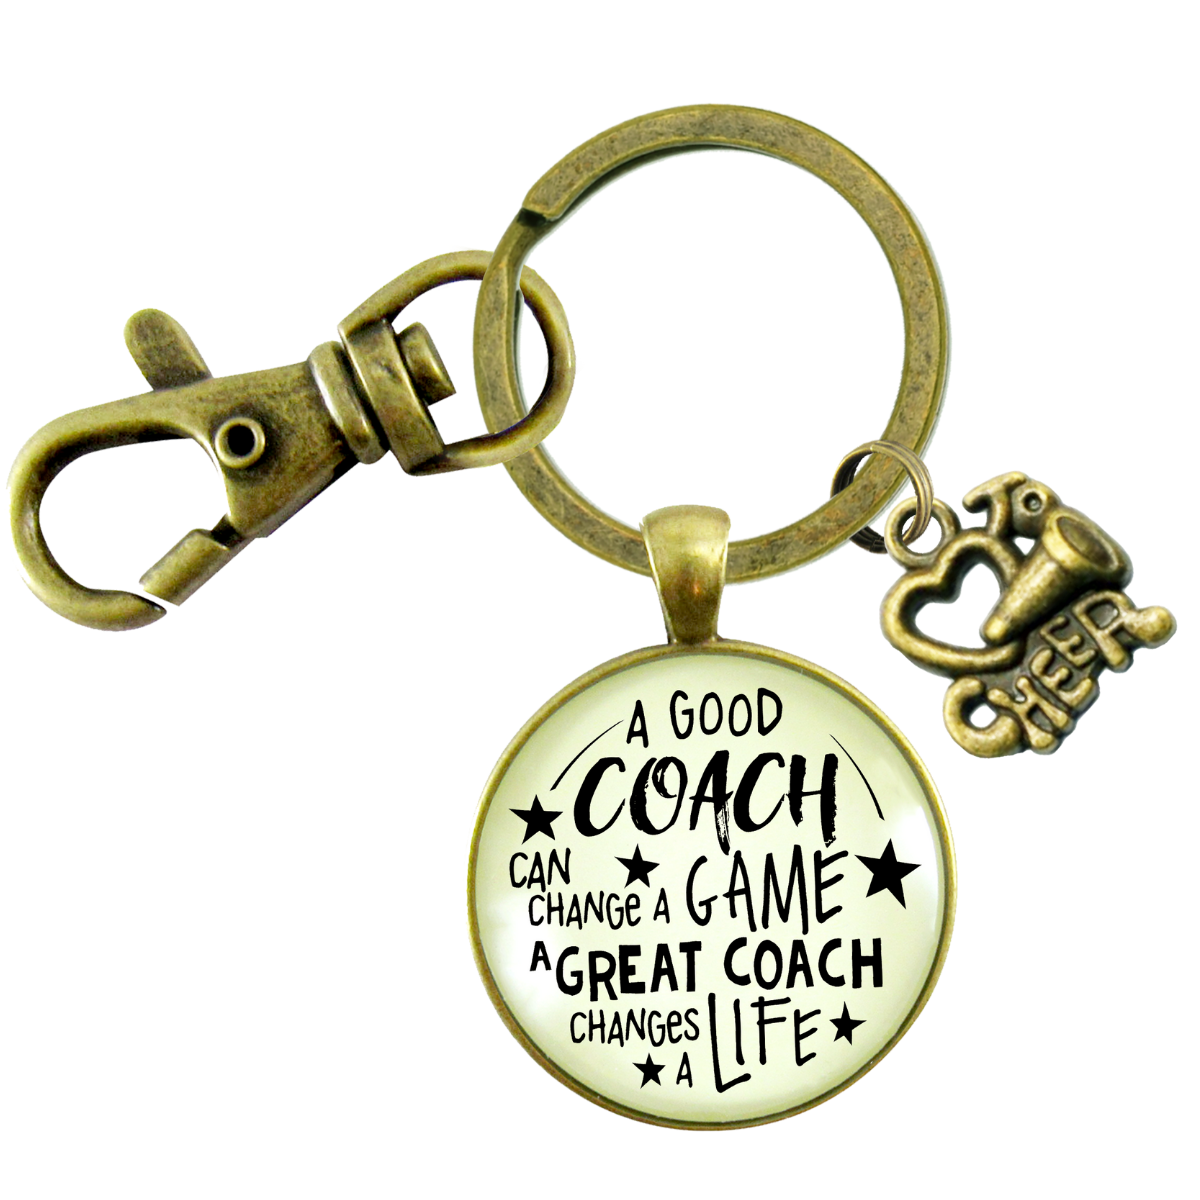 Cheer Coaching Sport Keychain Great Coach Changes Life Thank You Gift Cheering - Gutsy Goodness Handmade Jewelry;Cheer Coaching Sport Keychain Great Coach Changes Life Thank You Gift Cheering - Gutsy Goodness Handmade Jewelry Gifts